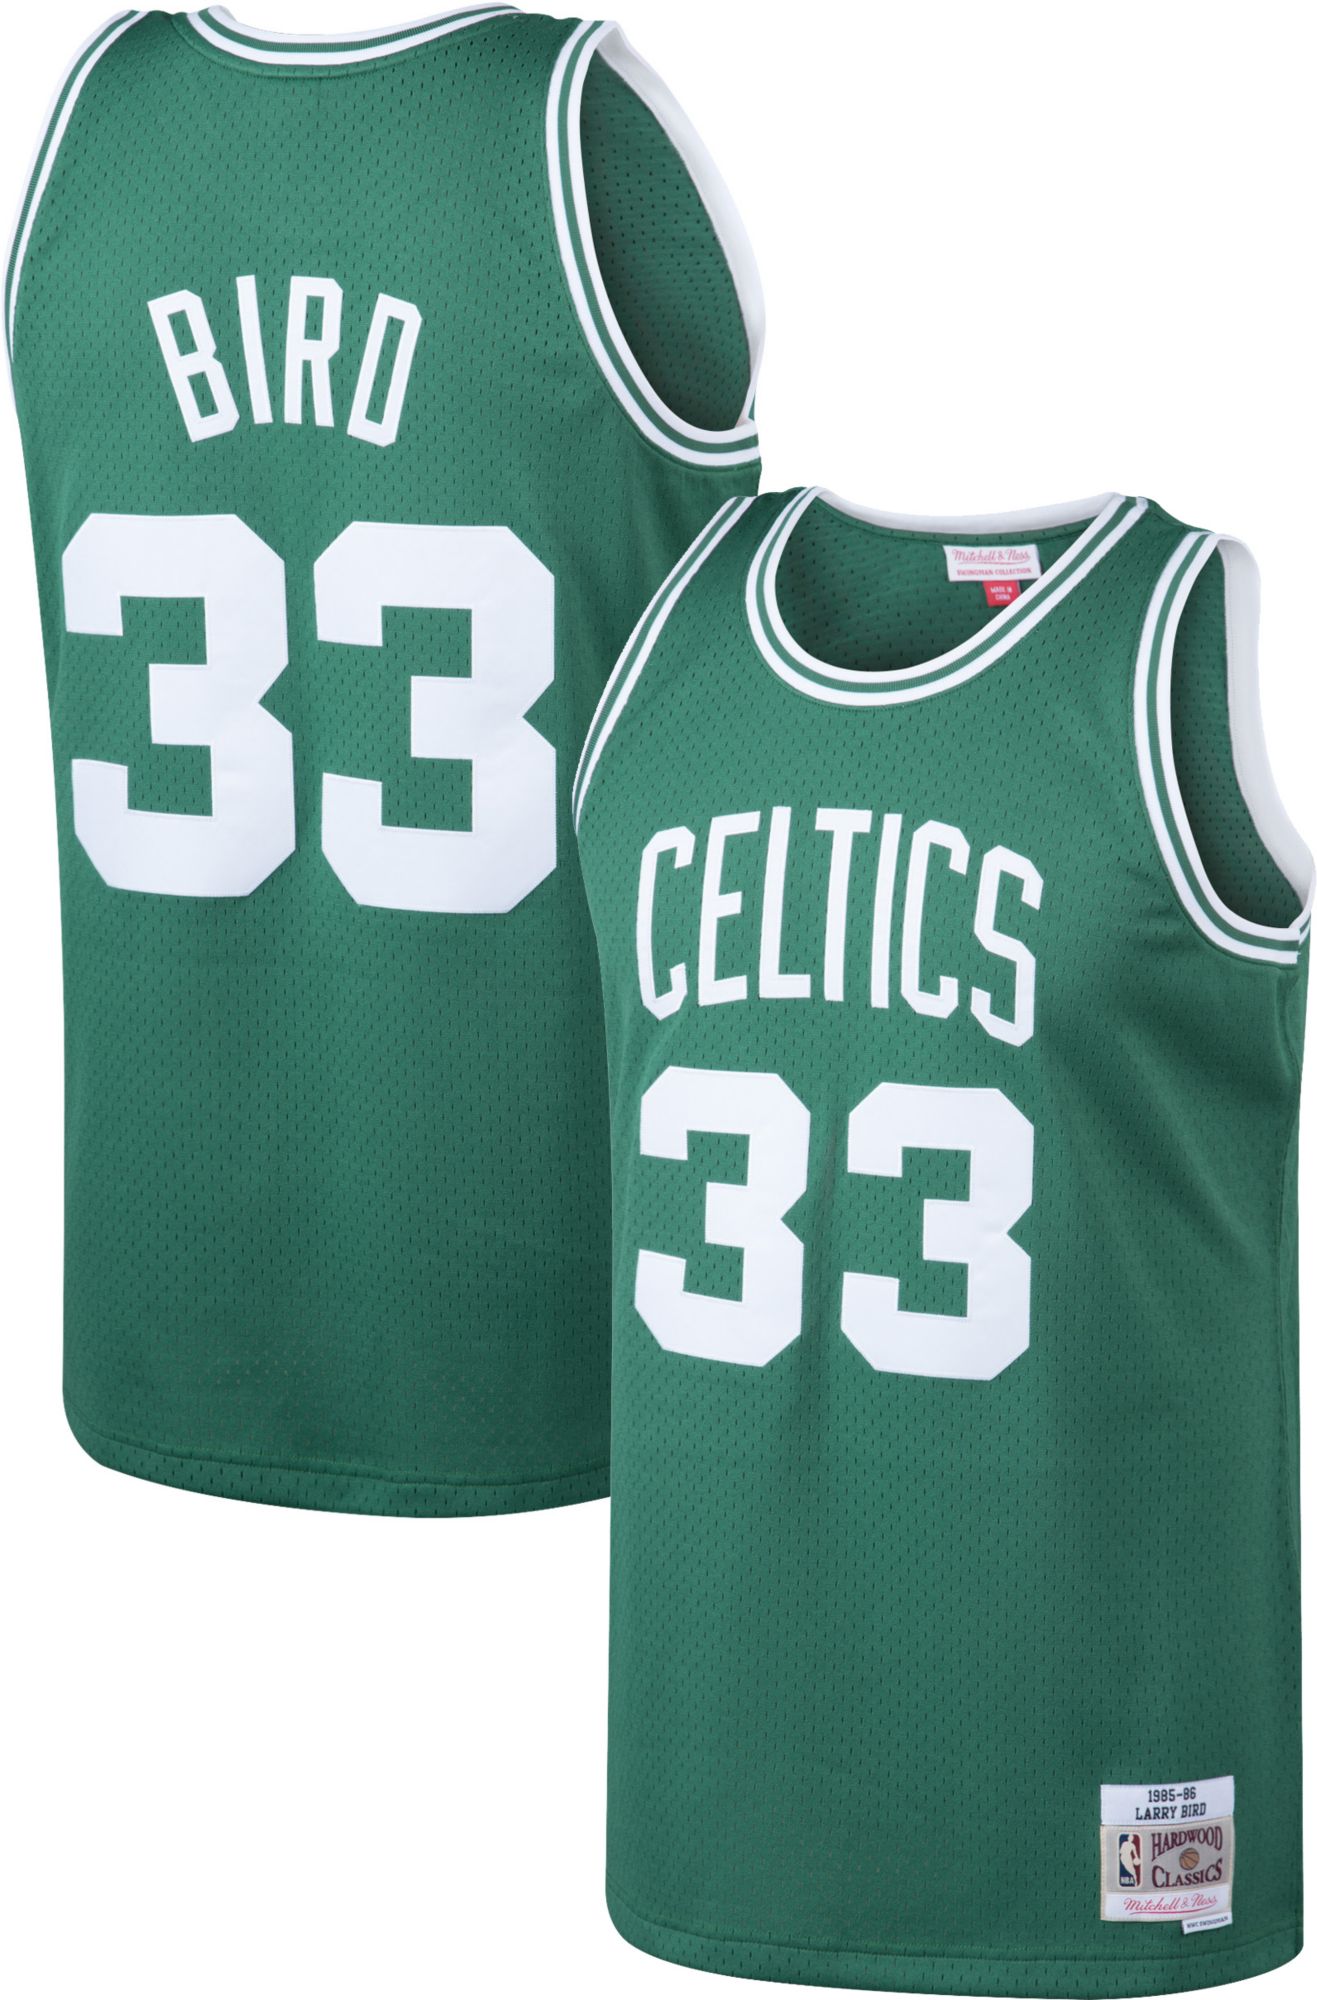 larry bird jersey youth size